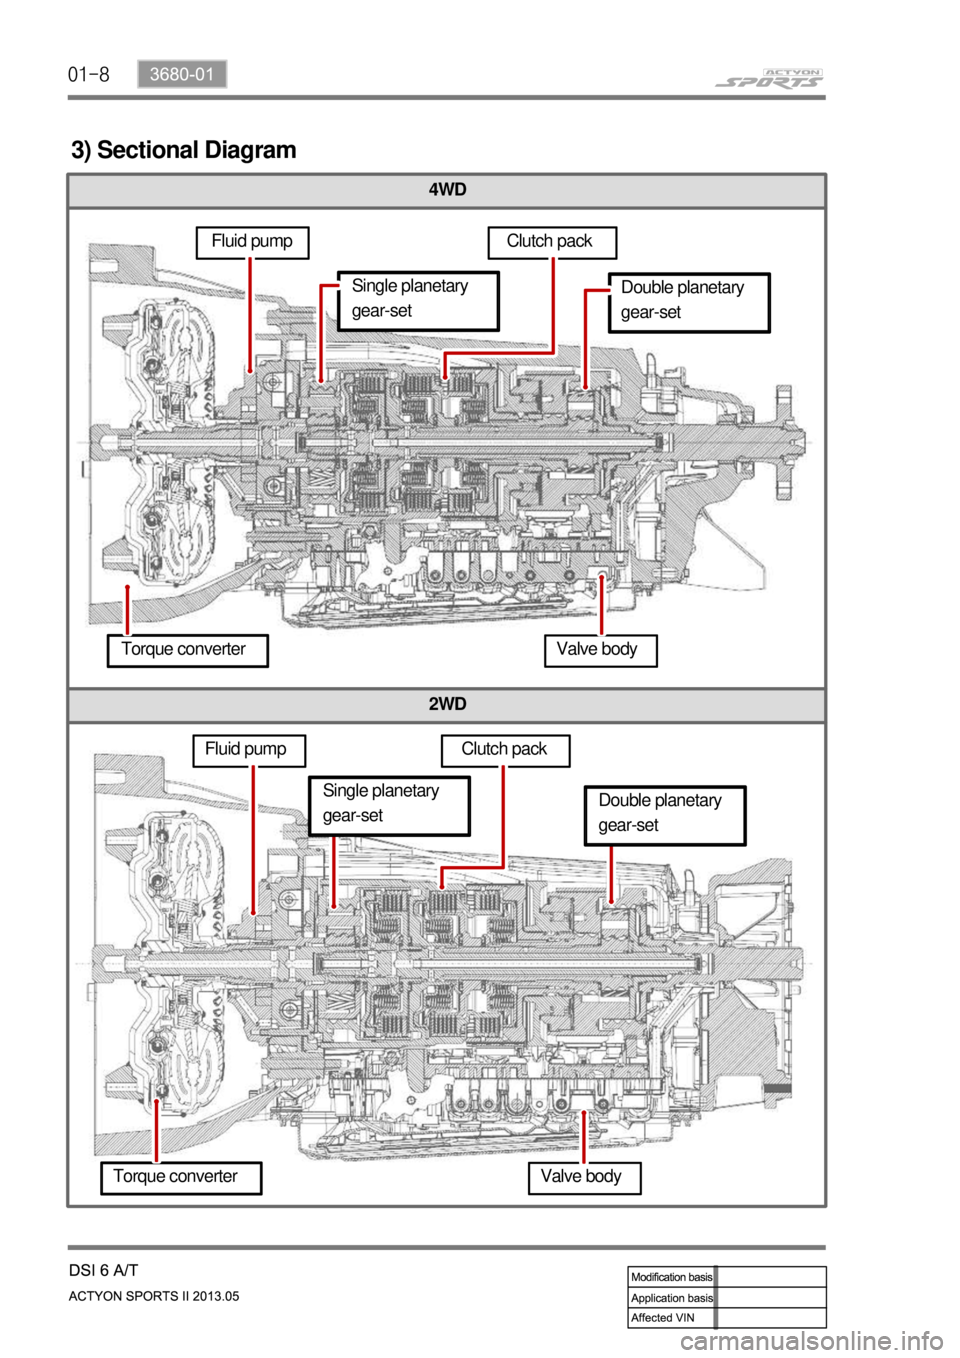 SSANGYONG NEW ACTYON SPORTS 2013  Service Manual 01-8
4WD
2WD
3) Sectional Diagram
Fluid pumpClutch pack
Double planetary 
gear-set
Torque converter Valve body
Fluid pumpSingle planetary 
gear-set
Clutch pack
Torque converter Valve body
Single plane